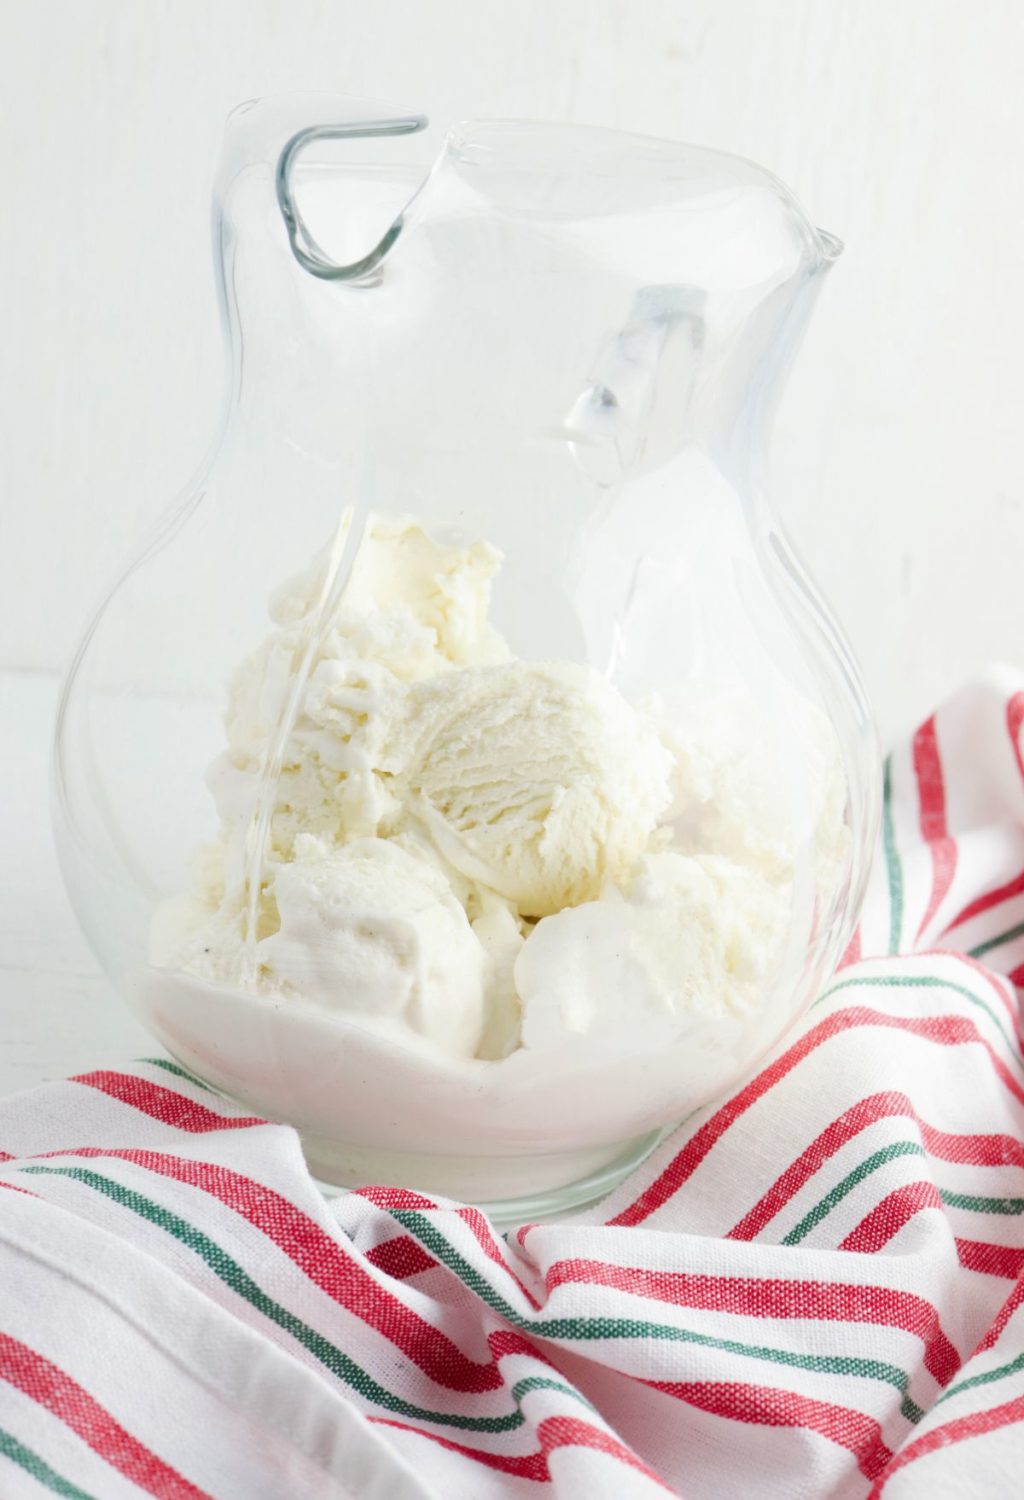 Ice cream in a glass pitcher on a white table.